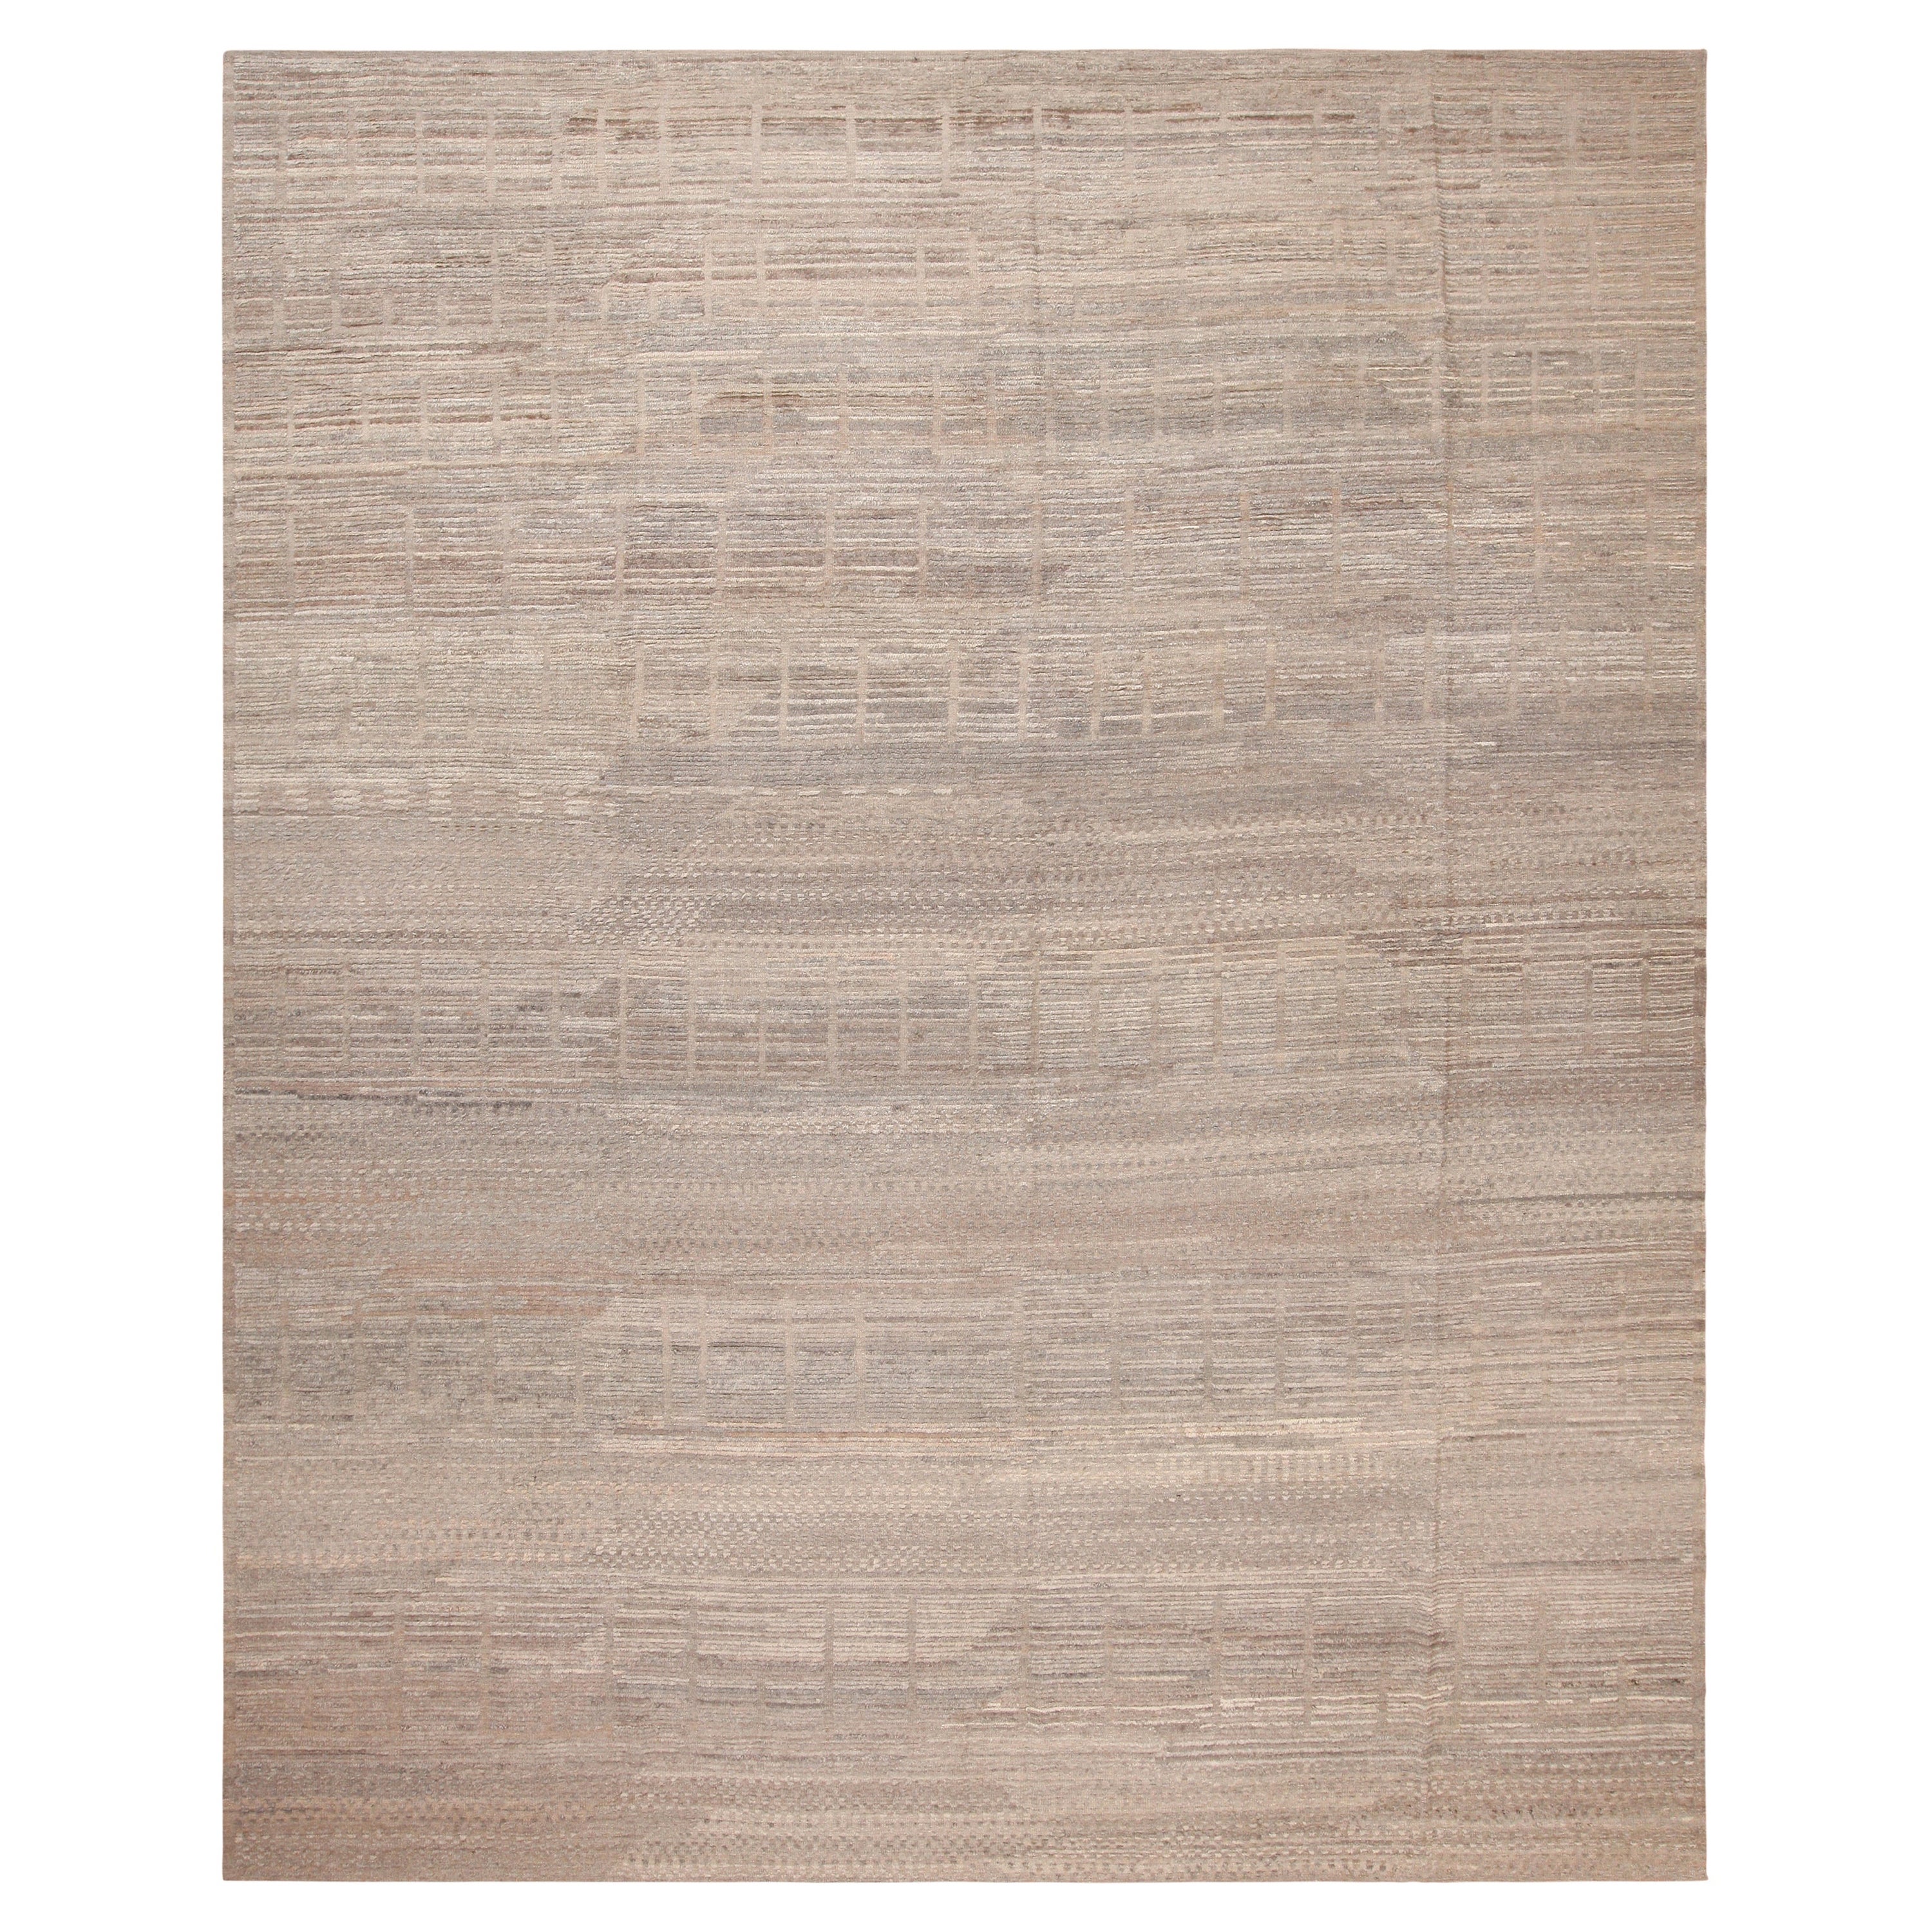 Tapis marocain moderne taupe collection Nazmiyal collection 11'9" x 14'9"